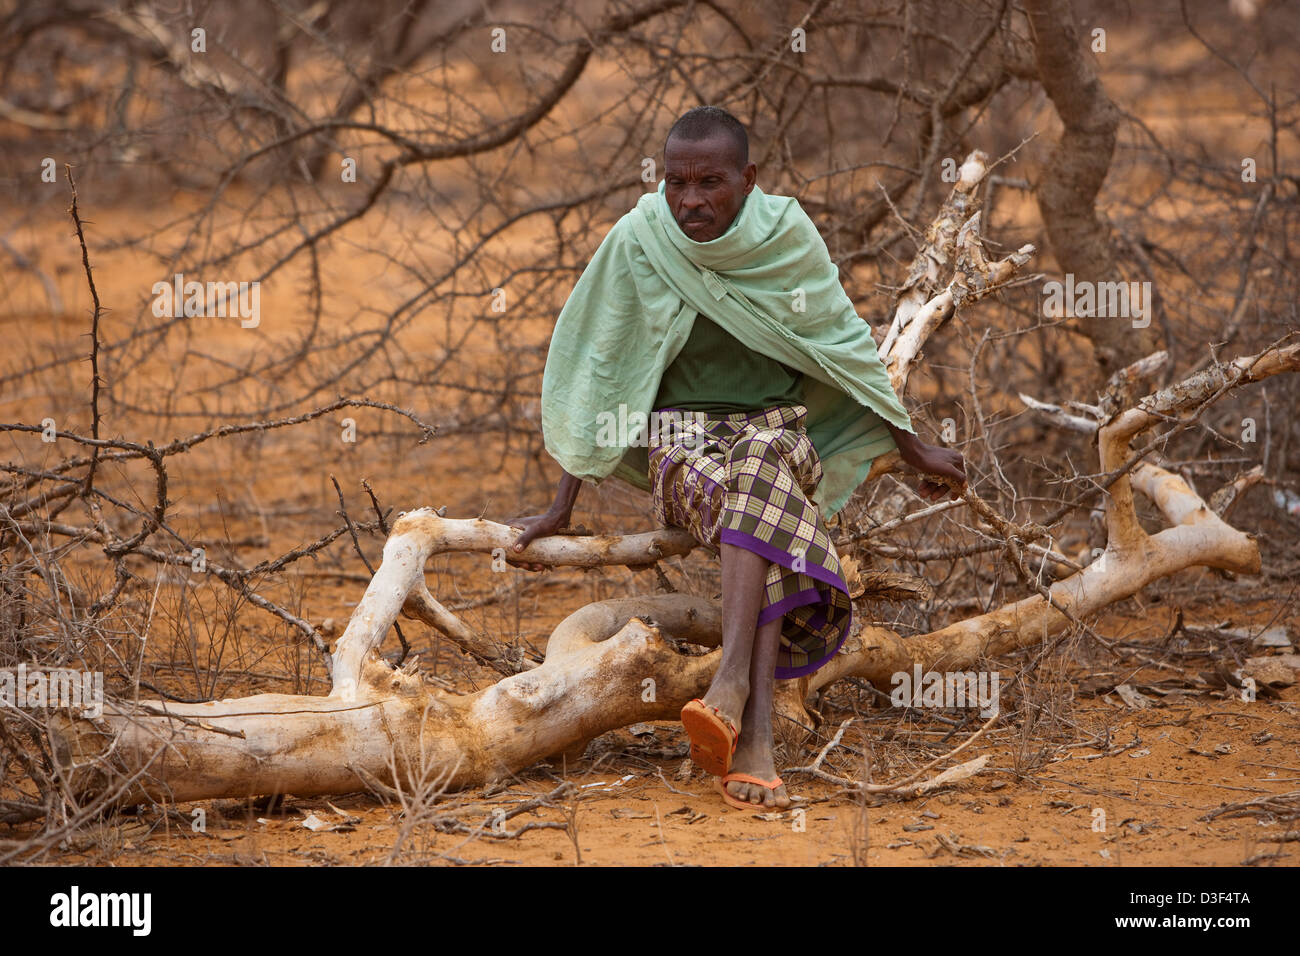 NYTALIYO, NORTH OF ELWAK, EASTERN KENYA, 3rd SEPTEMBER 2009: A man sits on a felled tree and considers suicide. Stock Photo